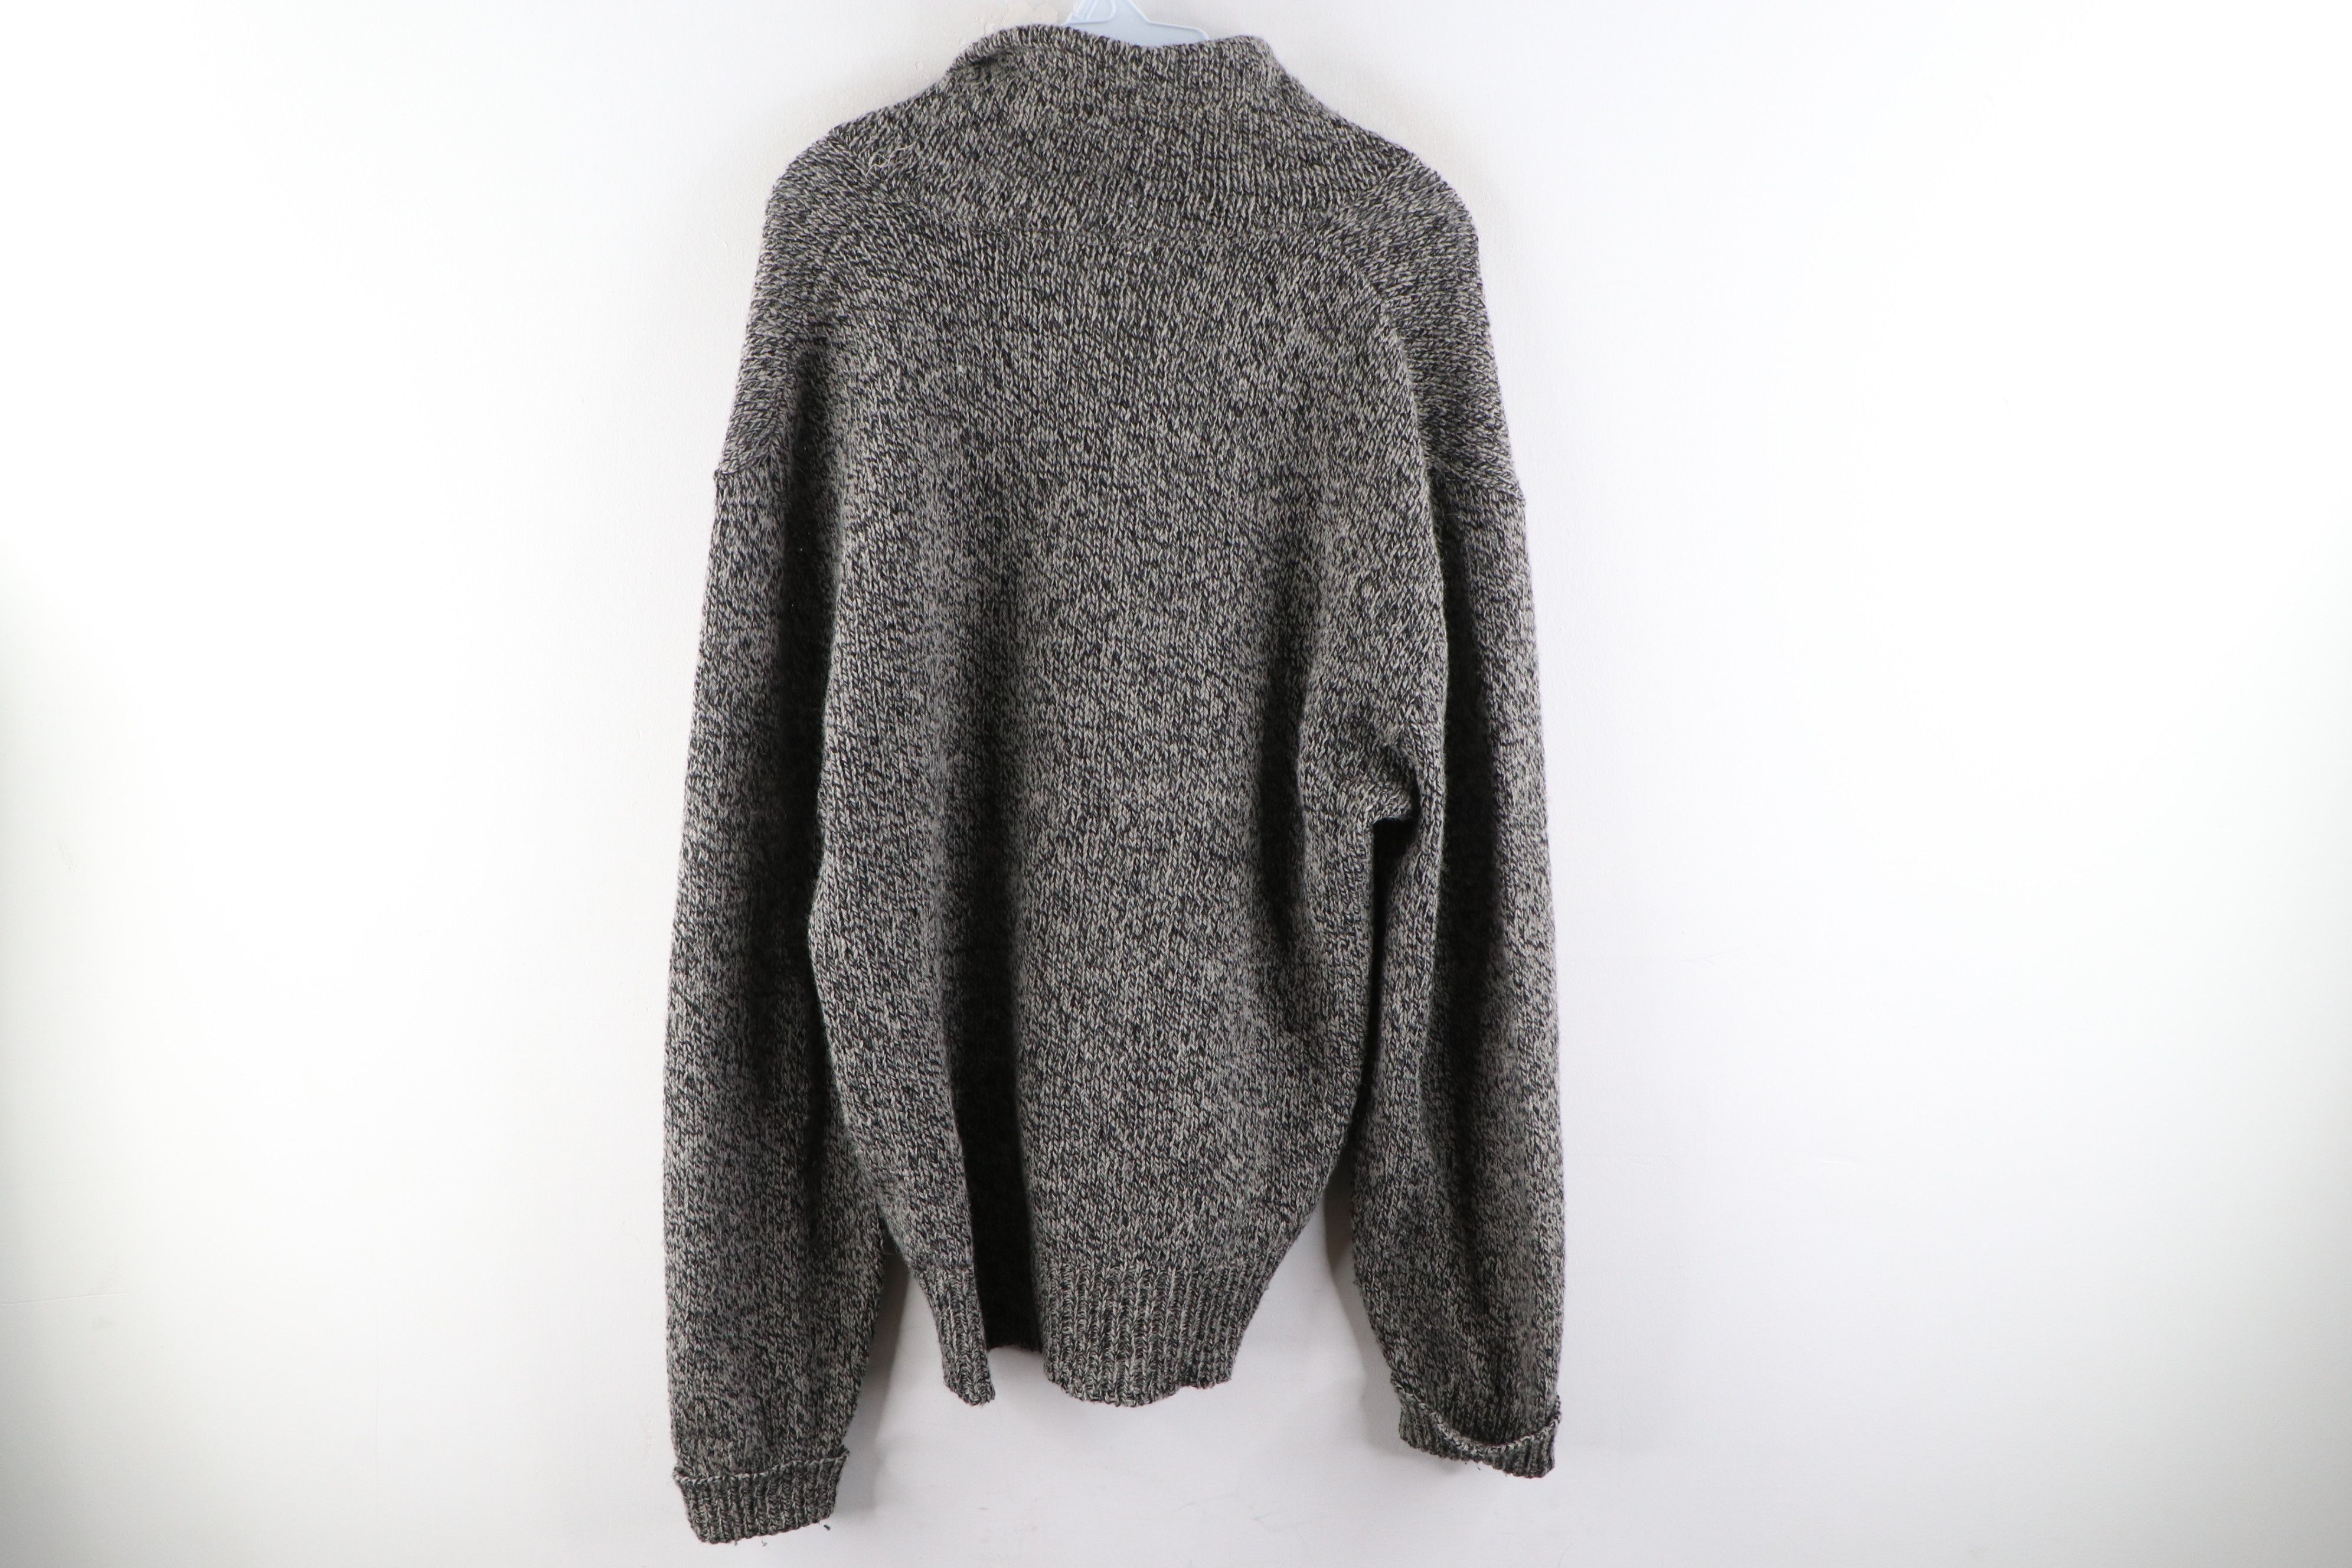 American Eagle Outfitters Vintage 90s American Eagle Wool Knit Shawl Collar Sweater Size US L / EU 52-54 / 3 - 5 Thumbnail